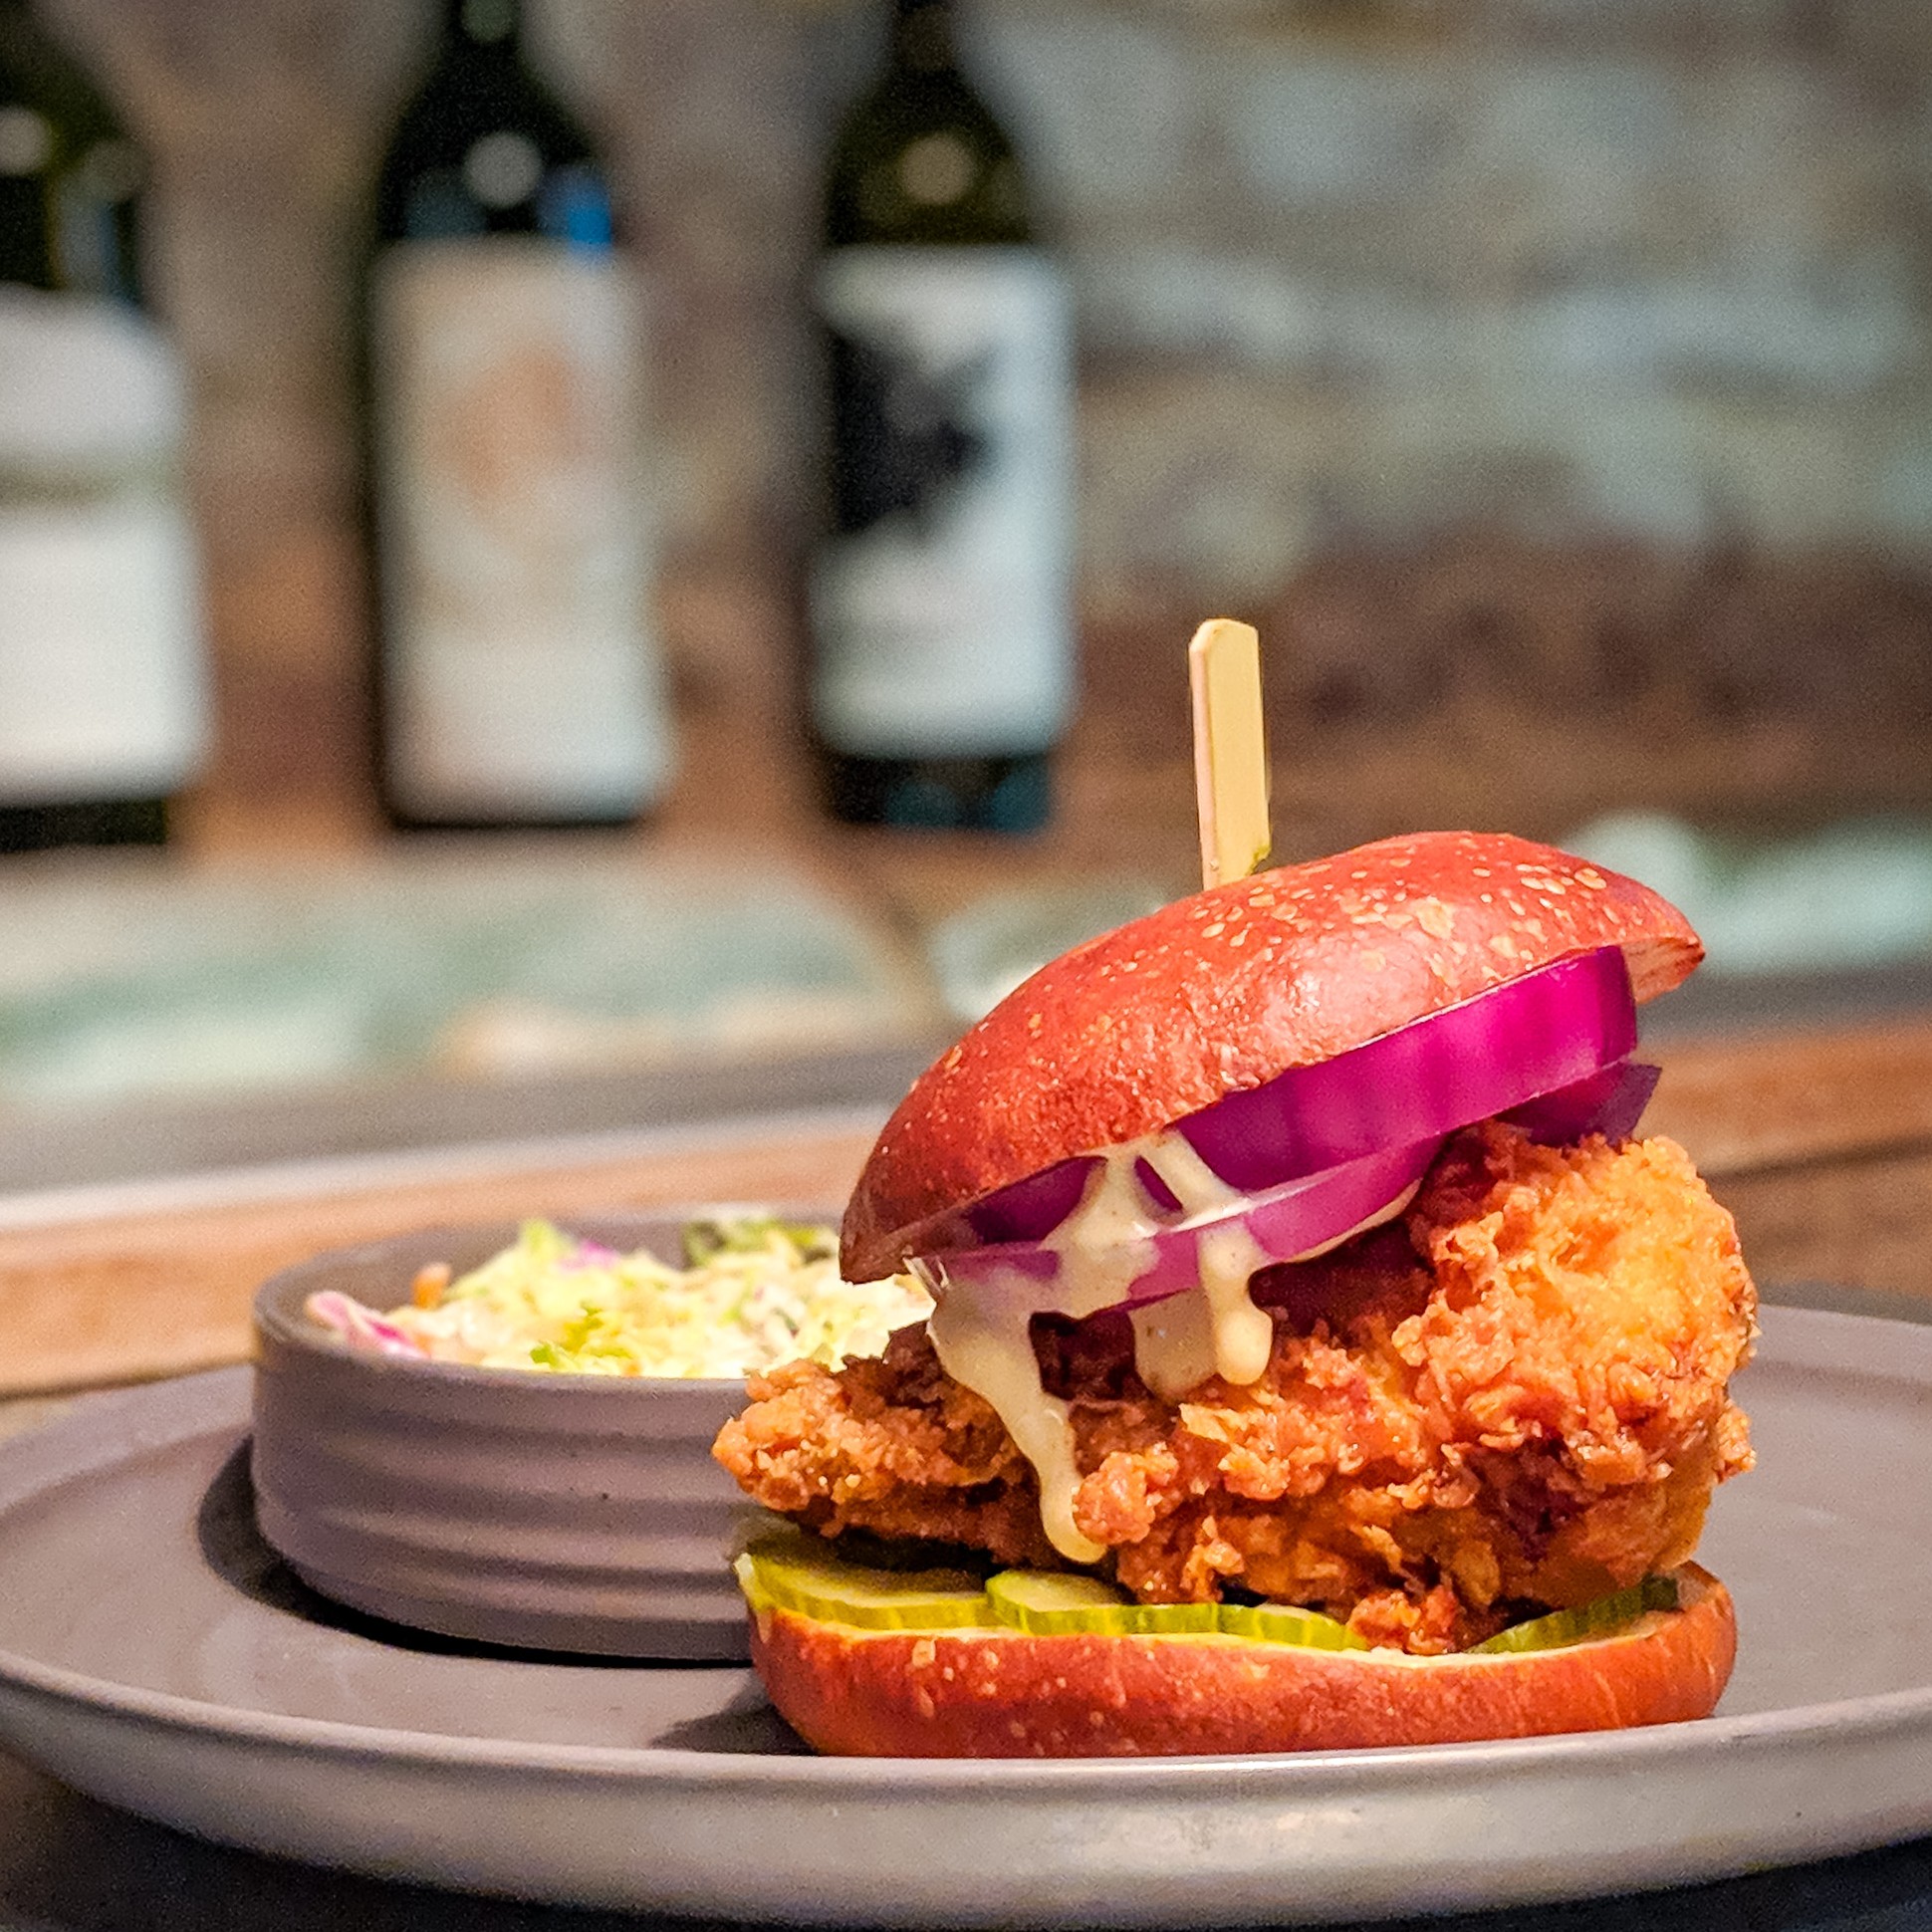 Fried chicken, red onion and pickles on a bun with a side of coleslaw